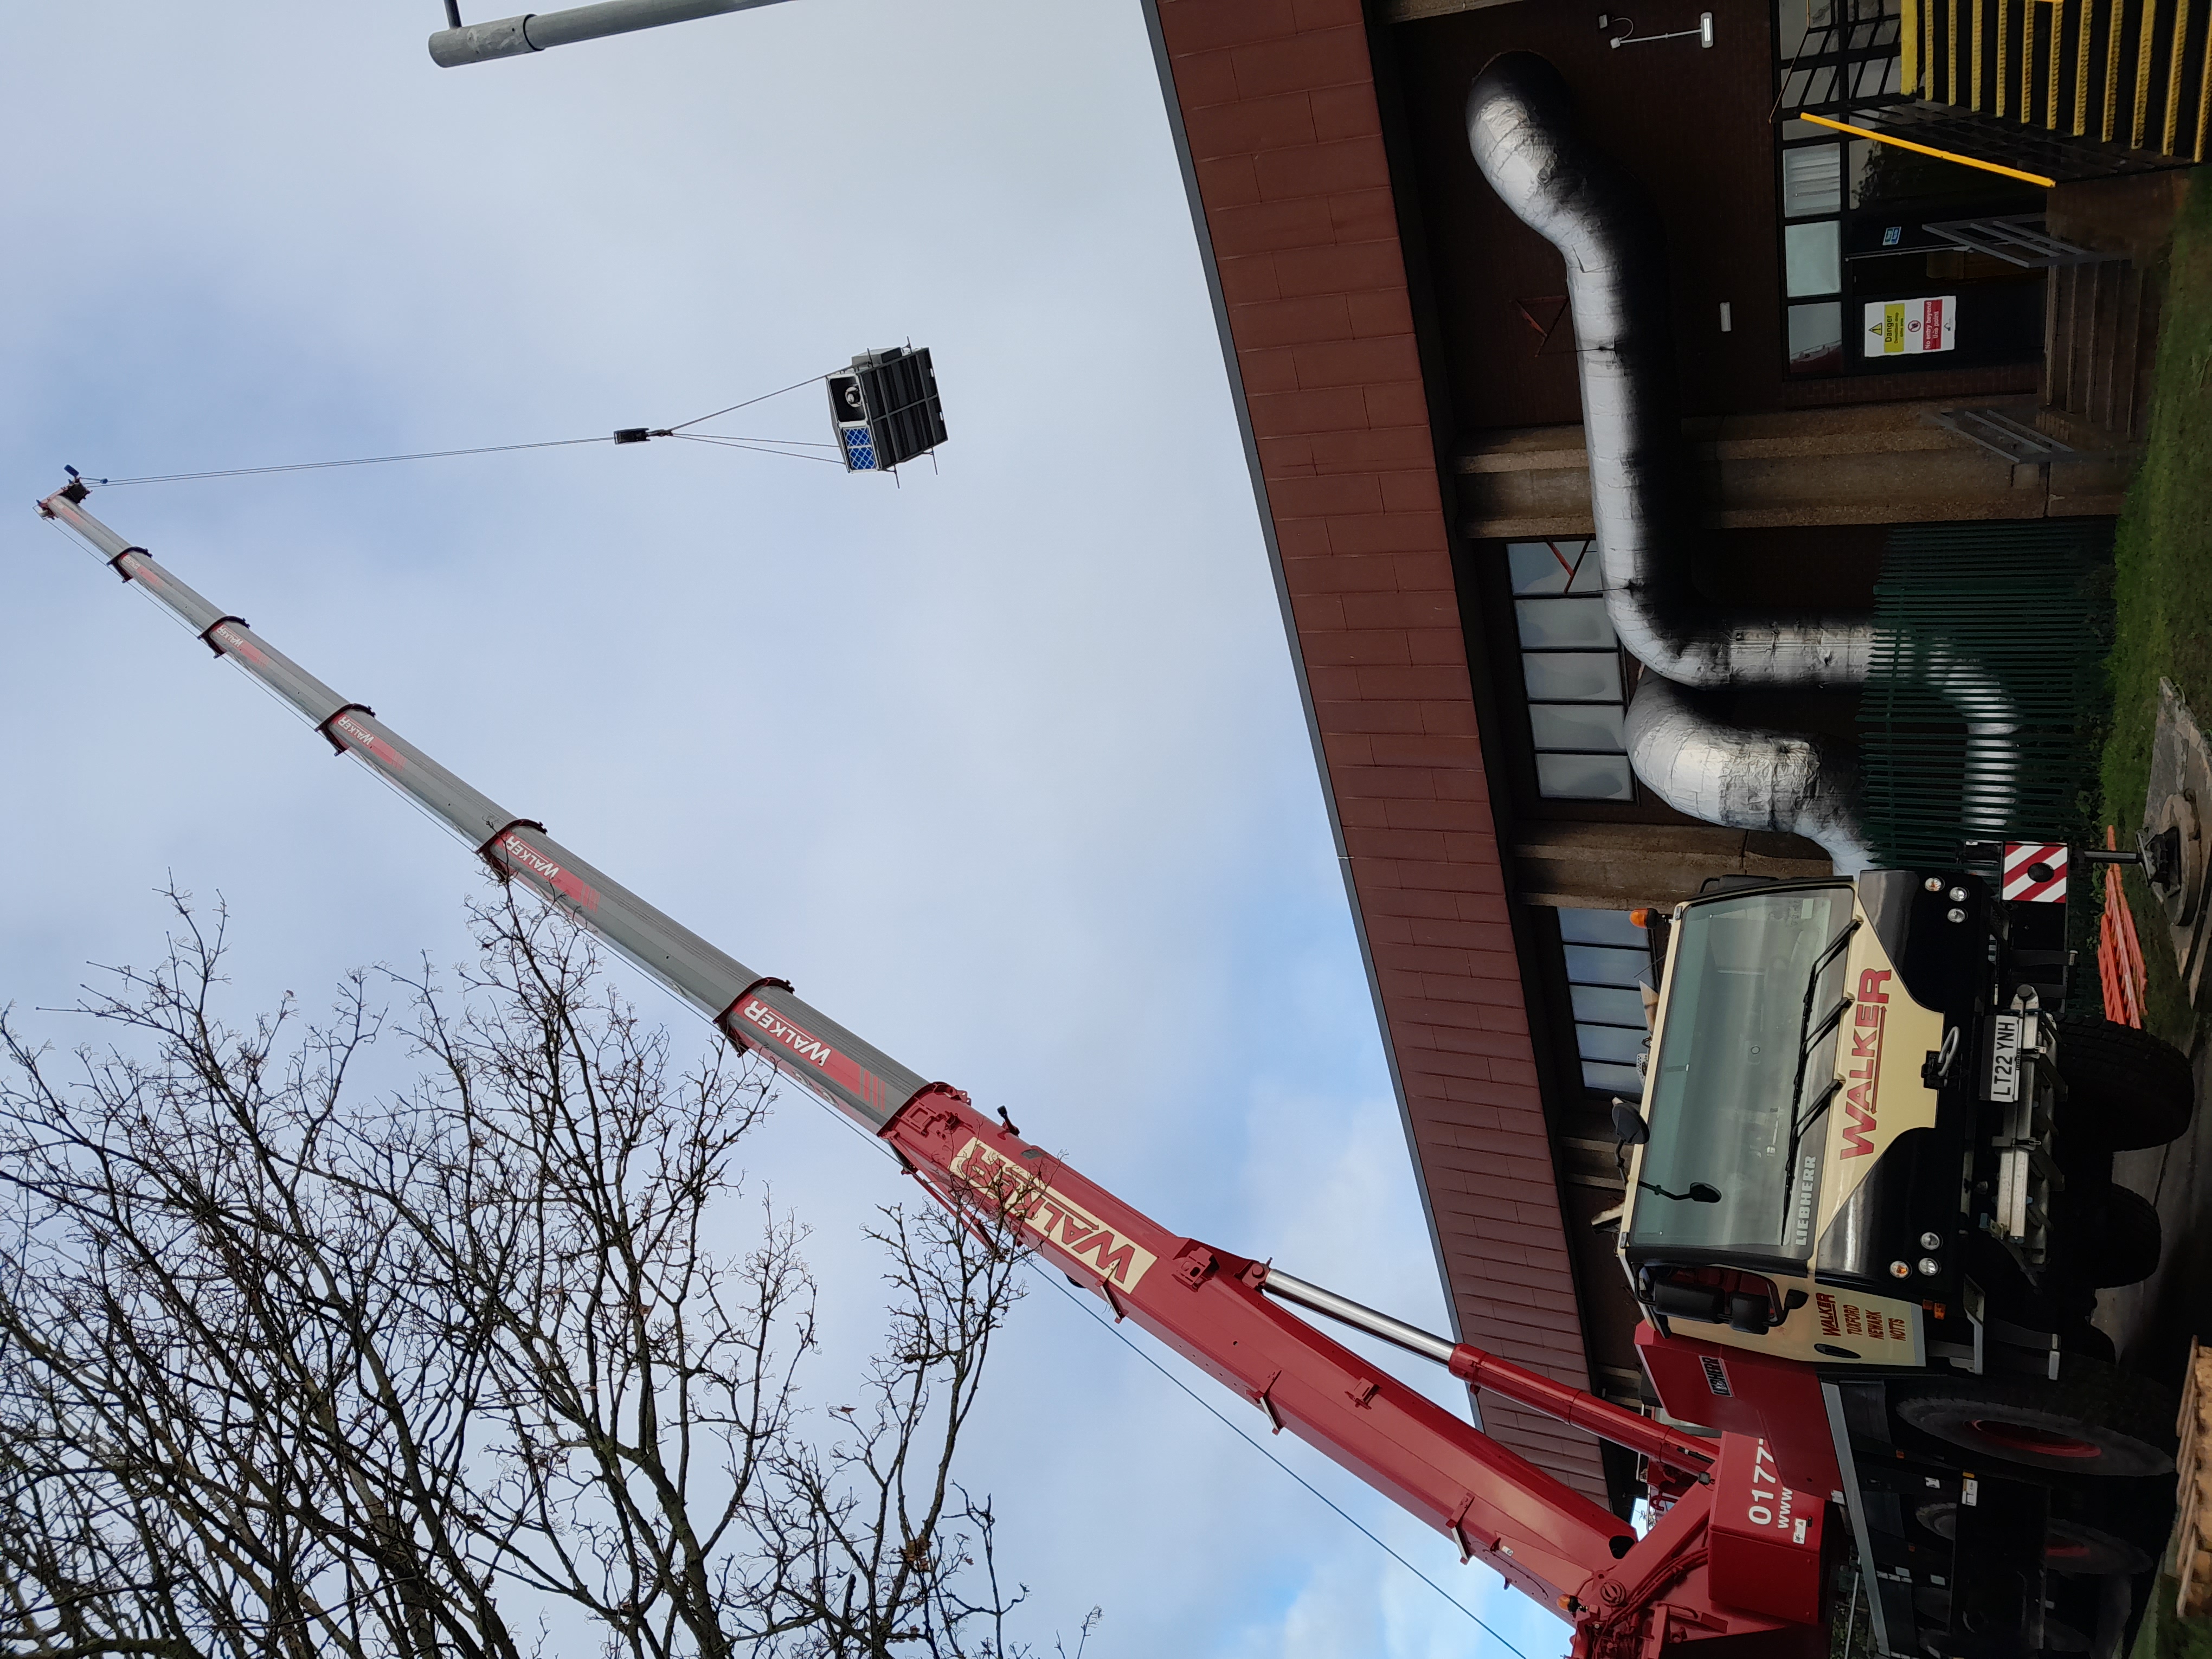 ventilation unit being craned onto the roof